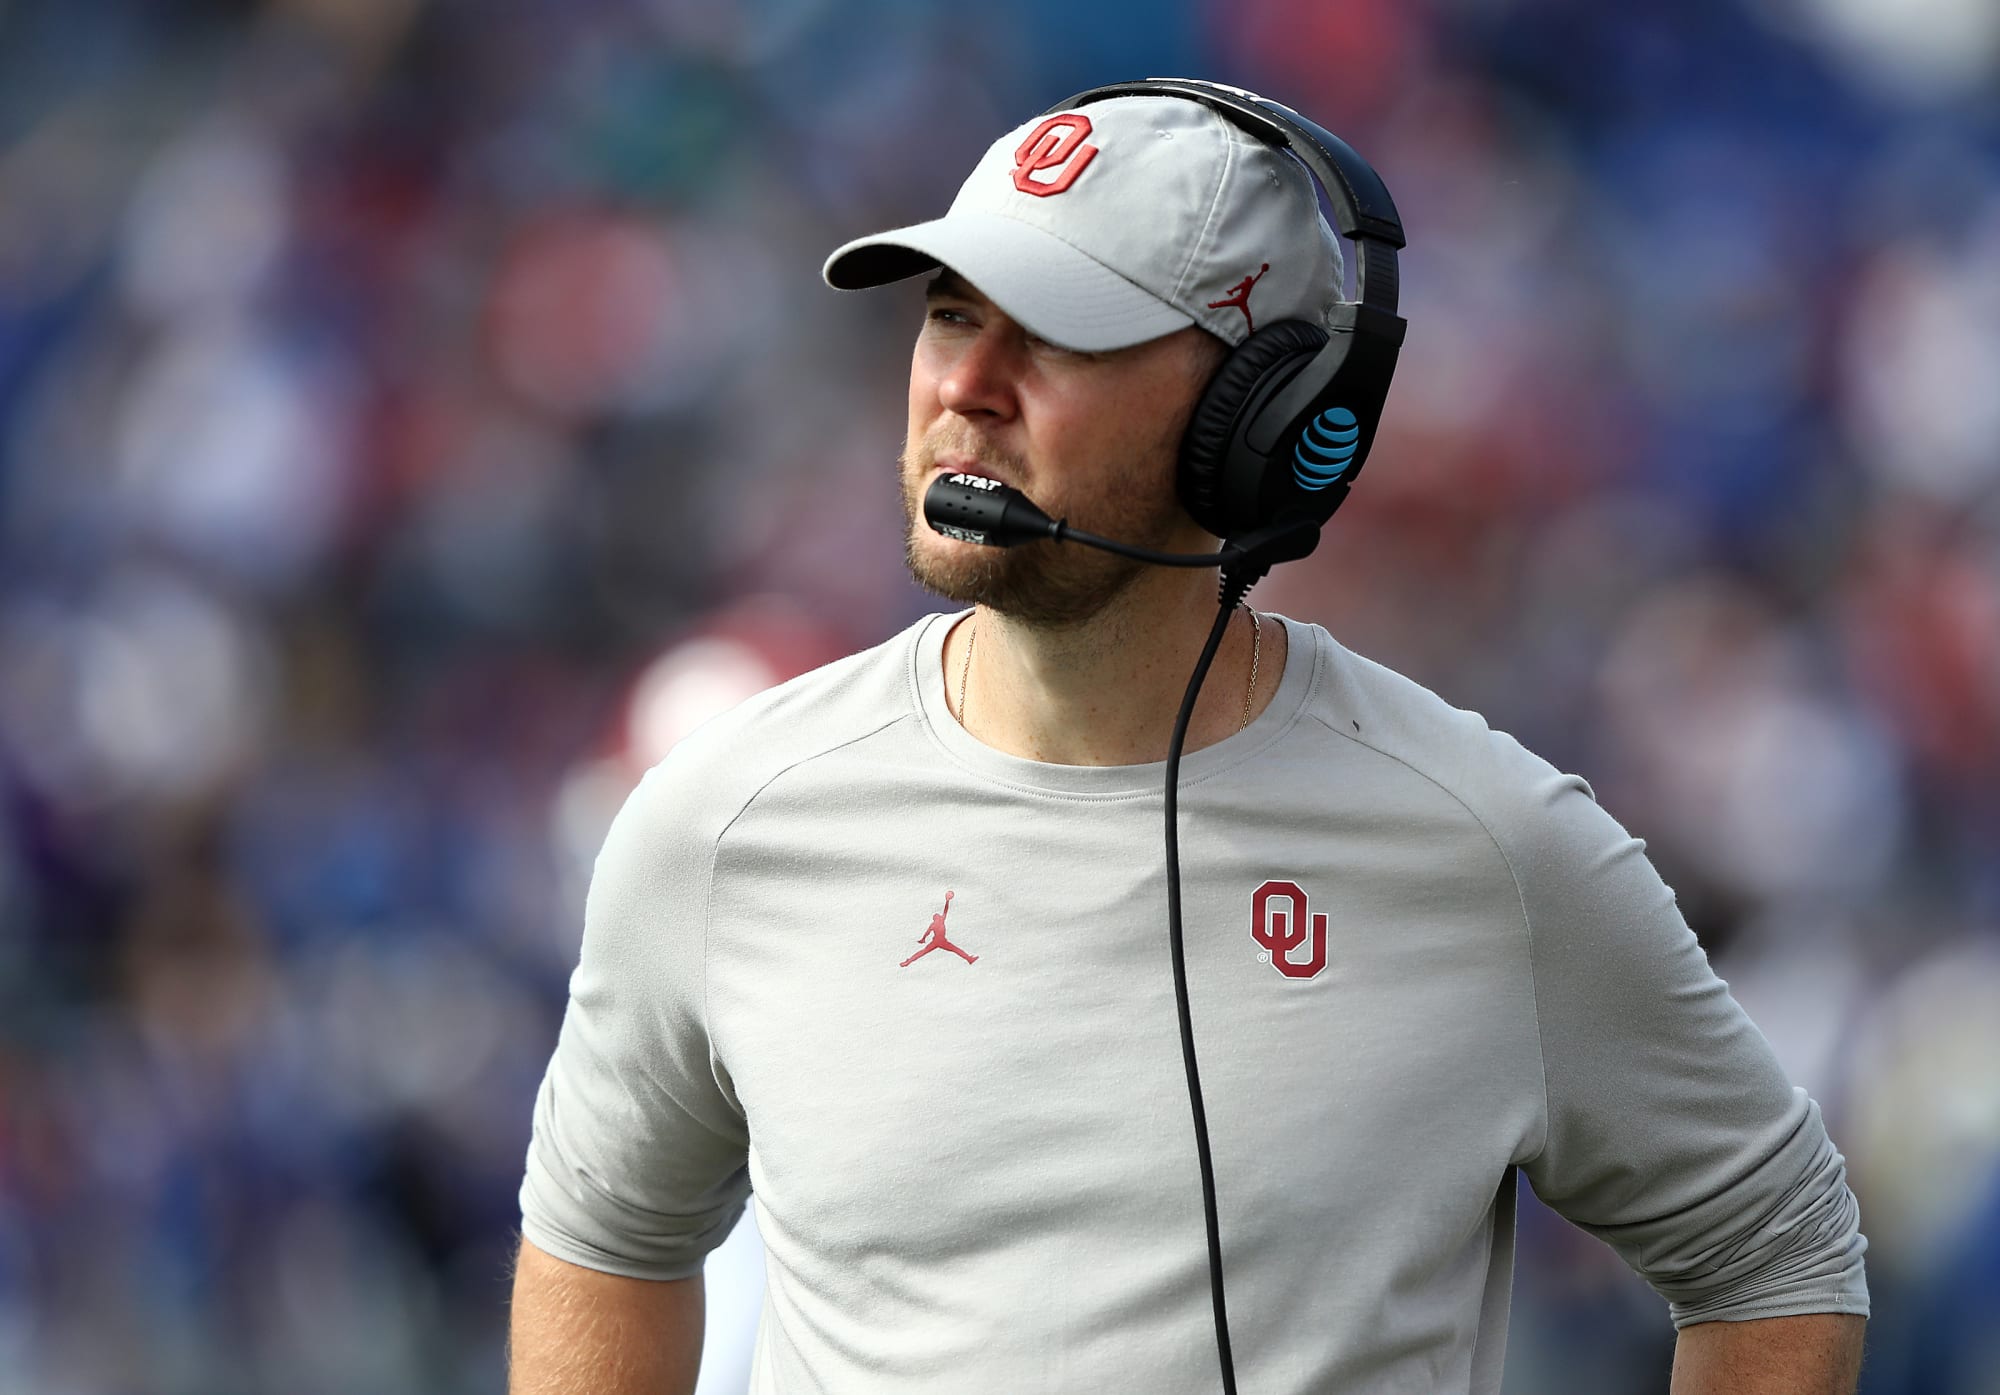 Lincoln Riley's $6.4 million salary 9th best among college football coaches